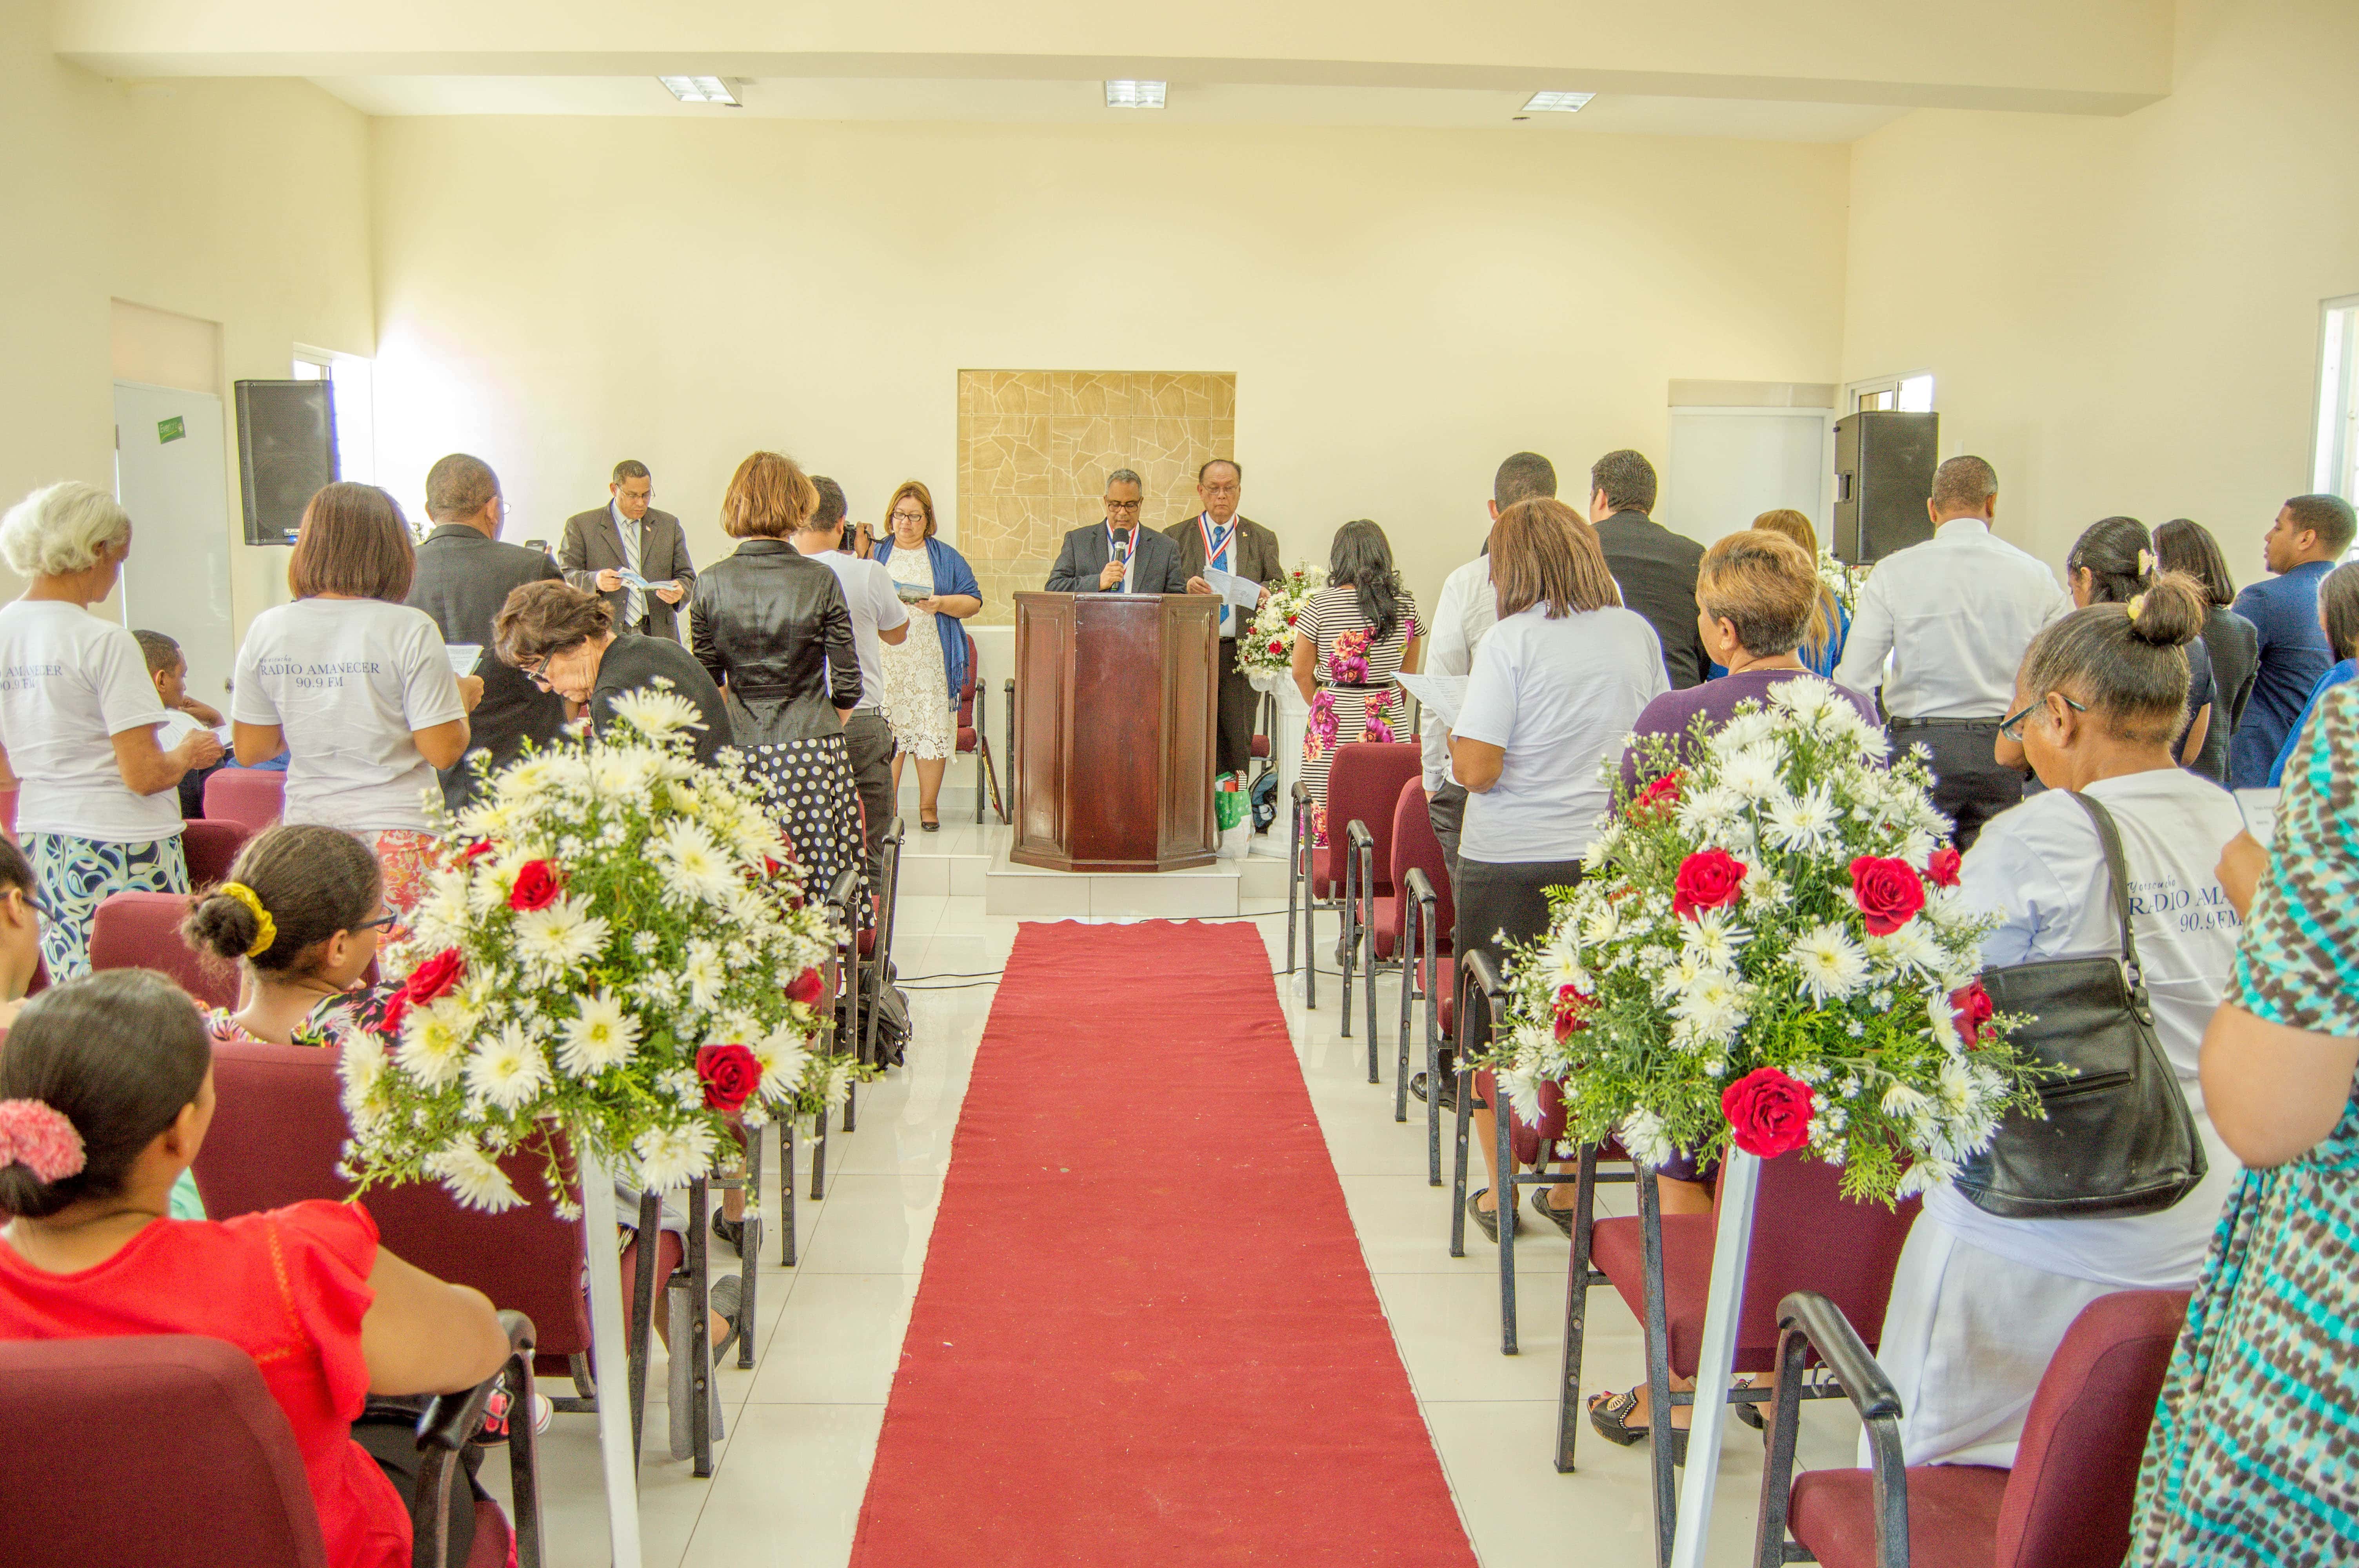 New church inaugurated by church leaders and members in Nagua, Maria Trinidad Sánchez, Dominican Republic on Dec. 18, 2016. Credit: Images by Jeyson Javier/IAD